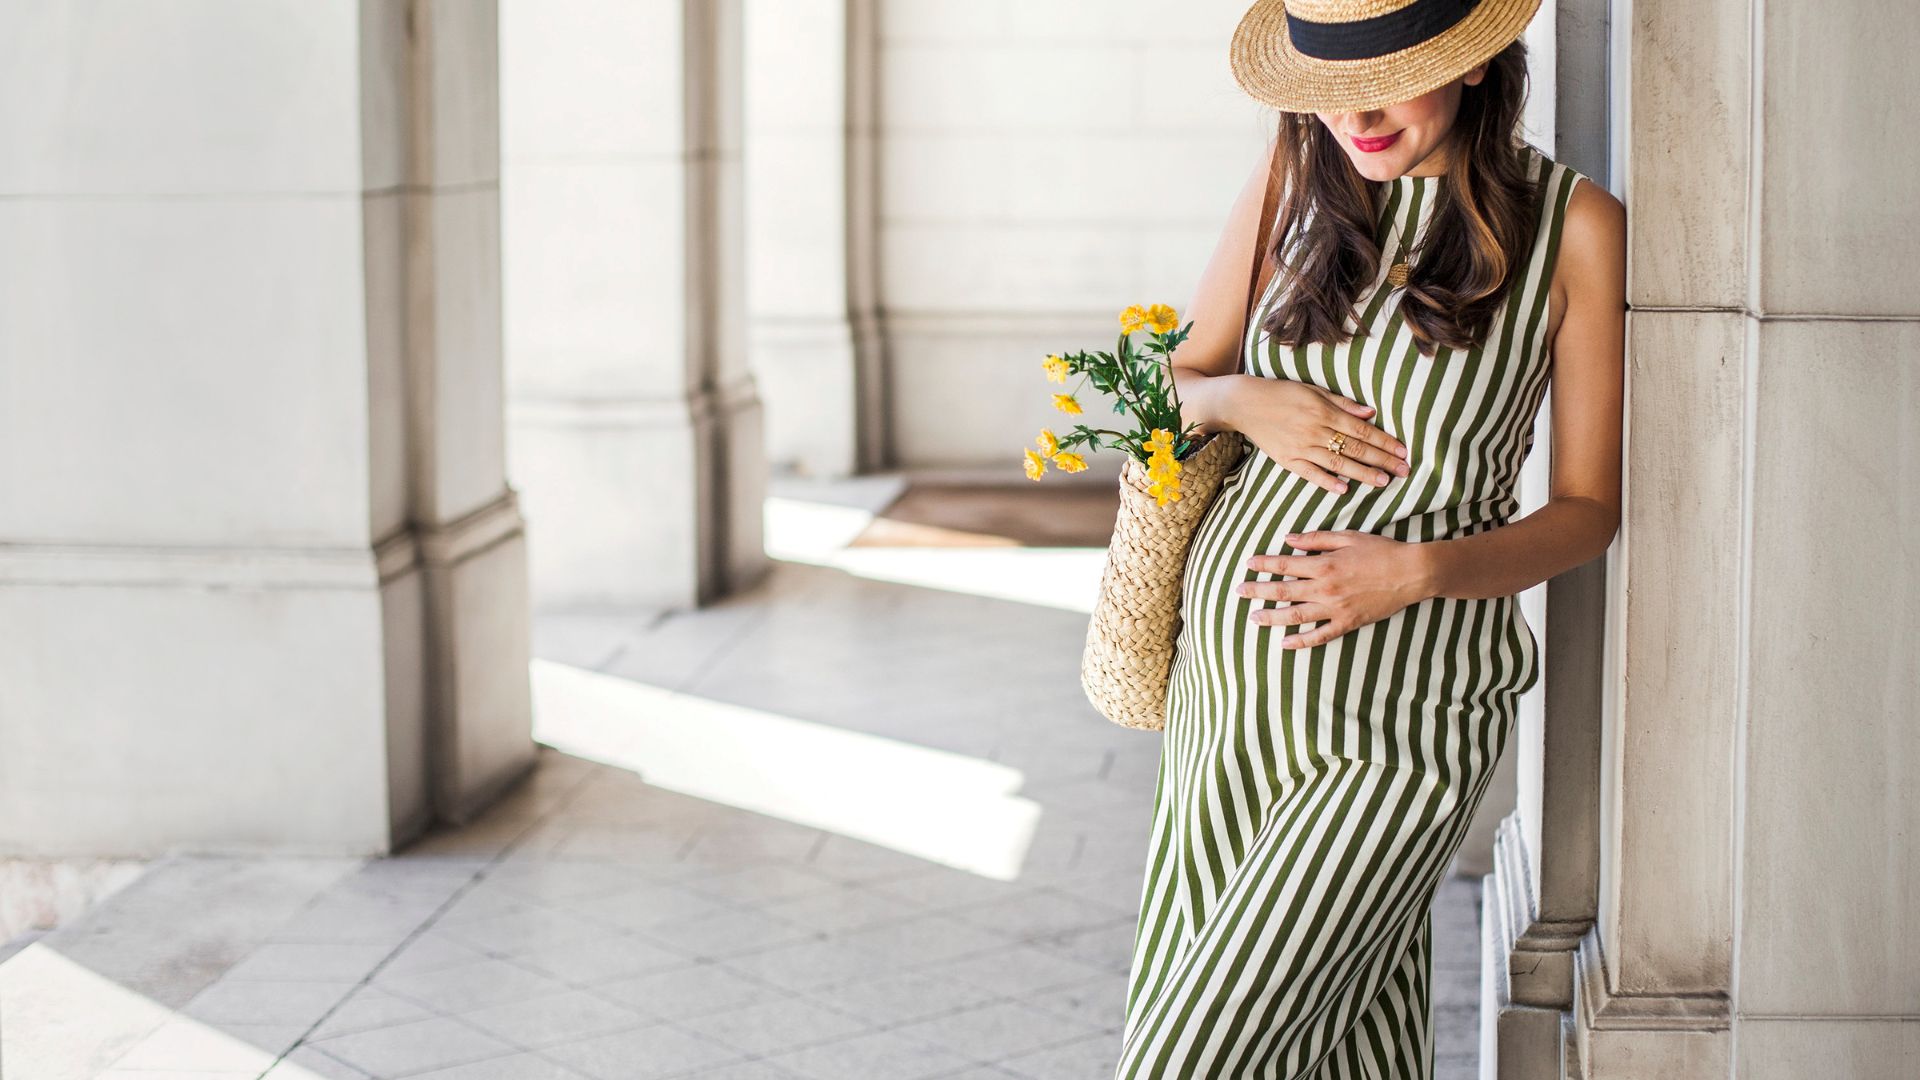 Looking gorgeous during pregnancy - tips for a comfortable & stylish summer wardrobe